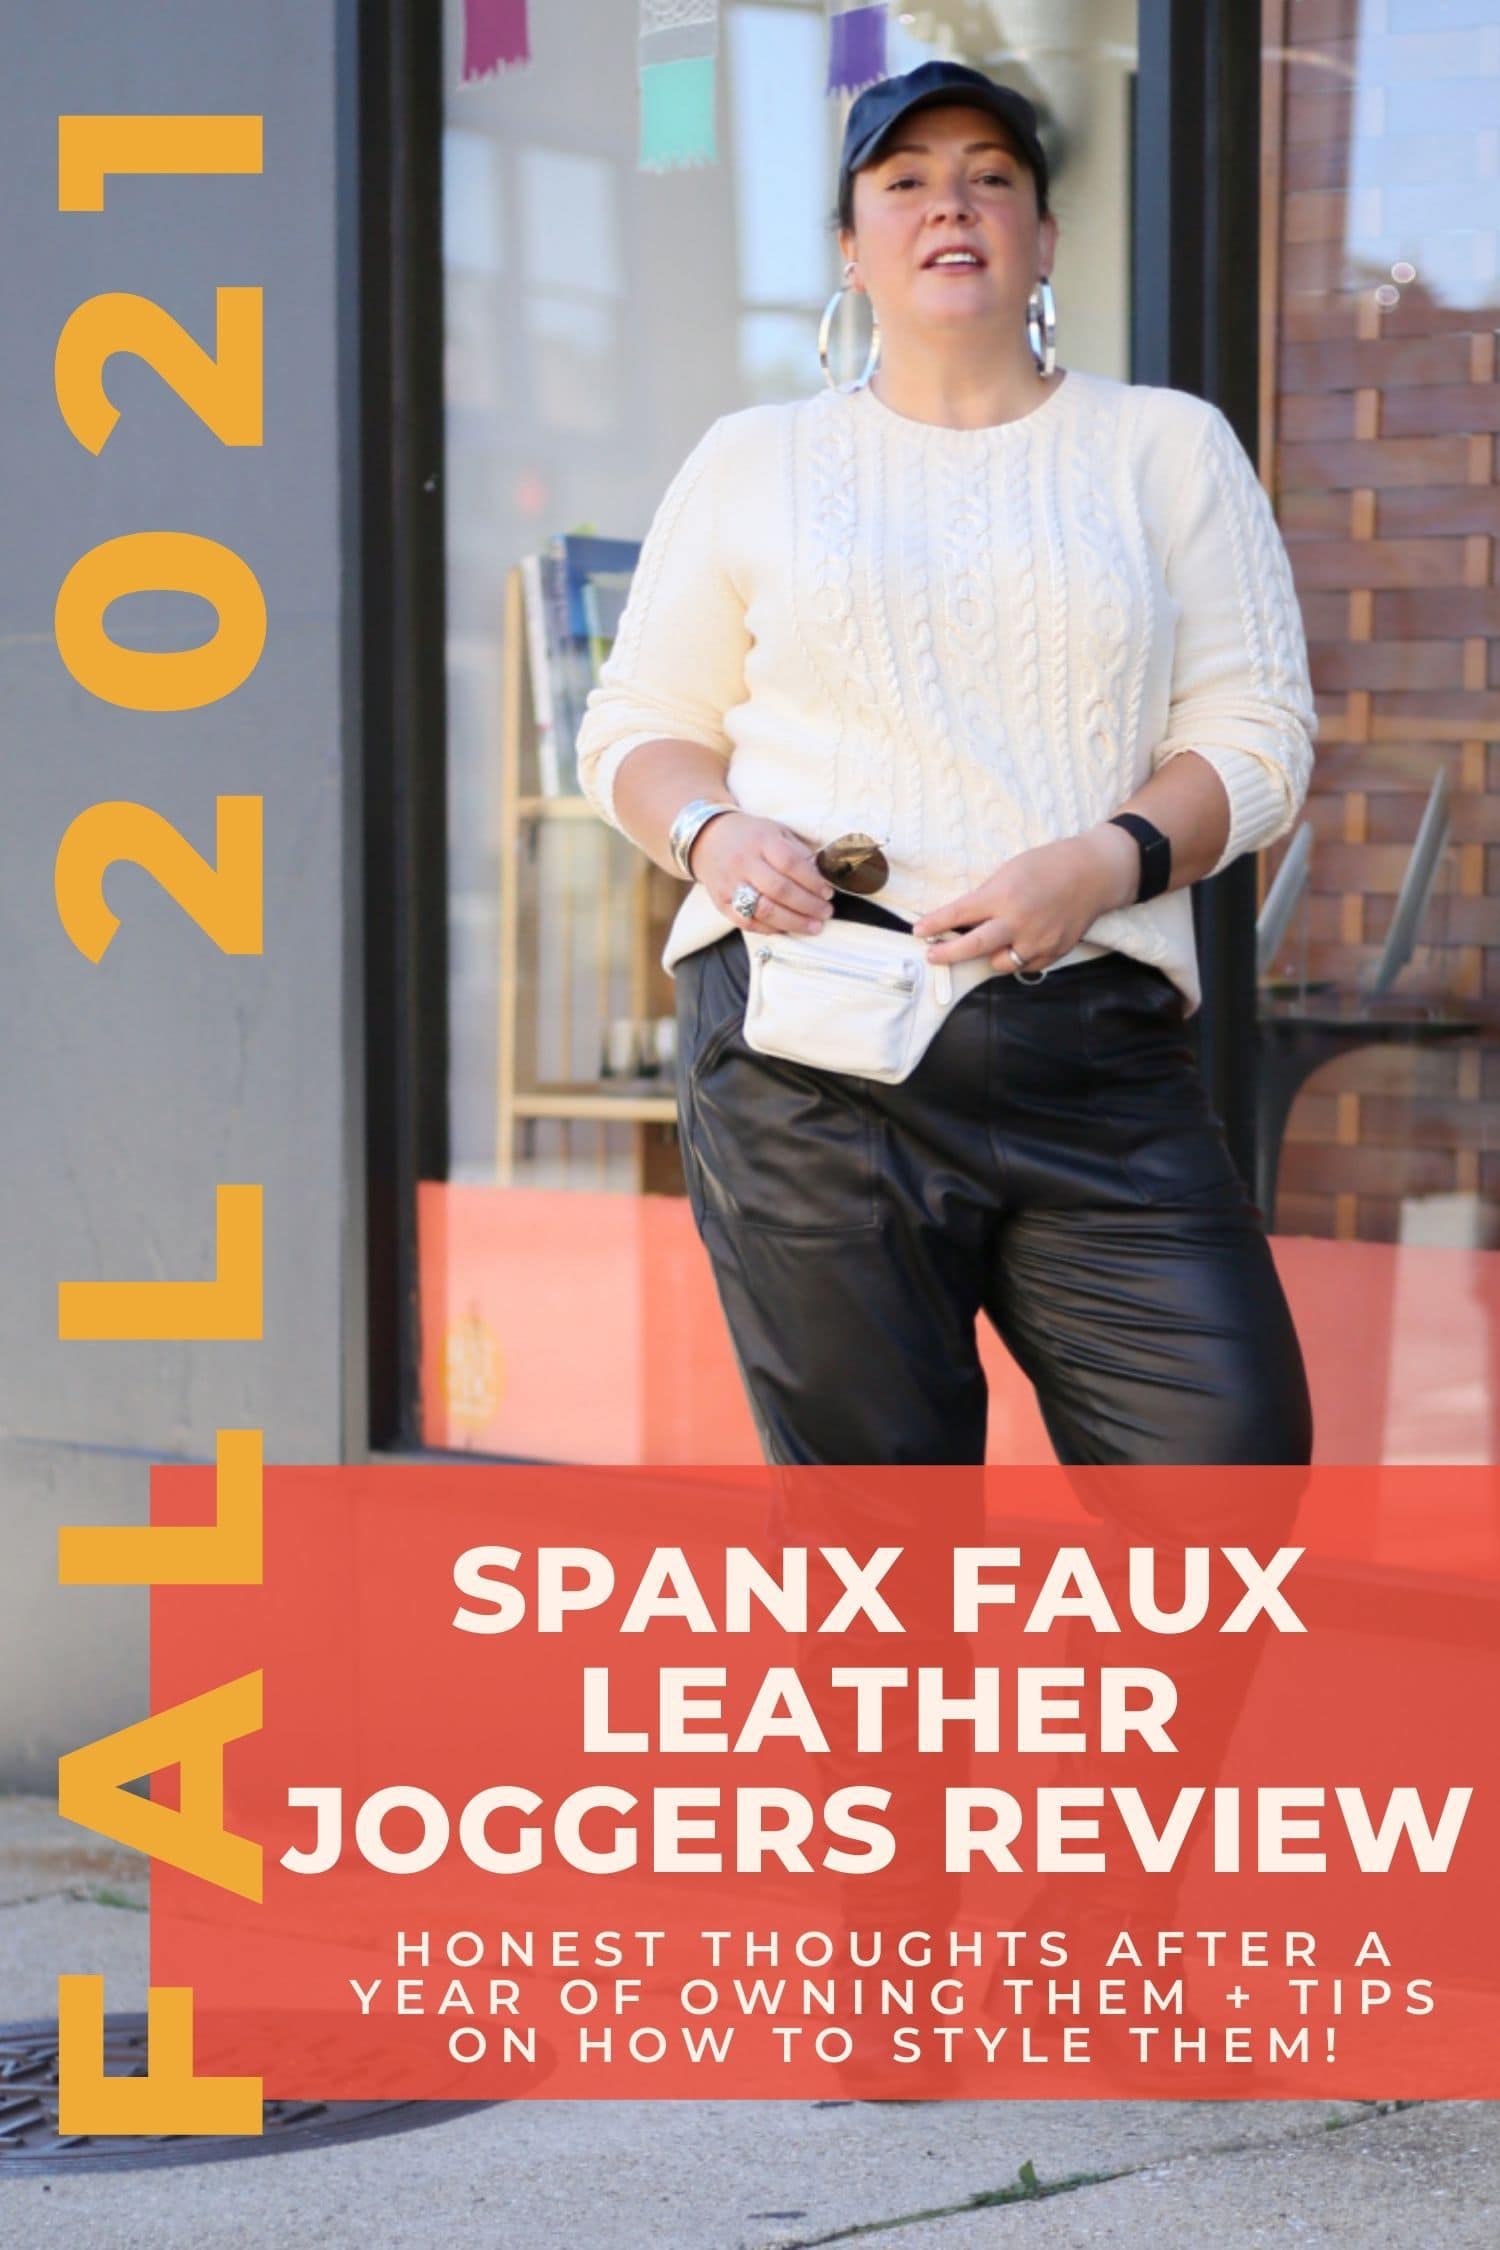 Comment “LINK” for all of these Spanx looks to be sent to your